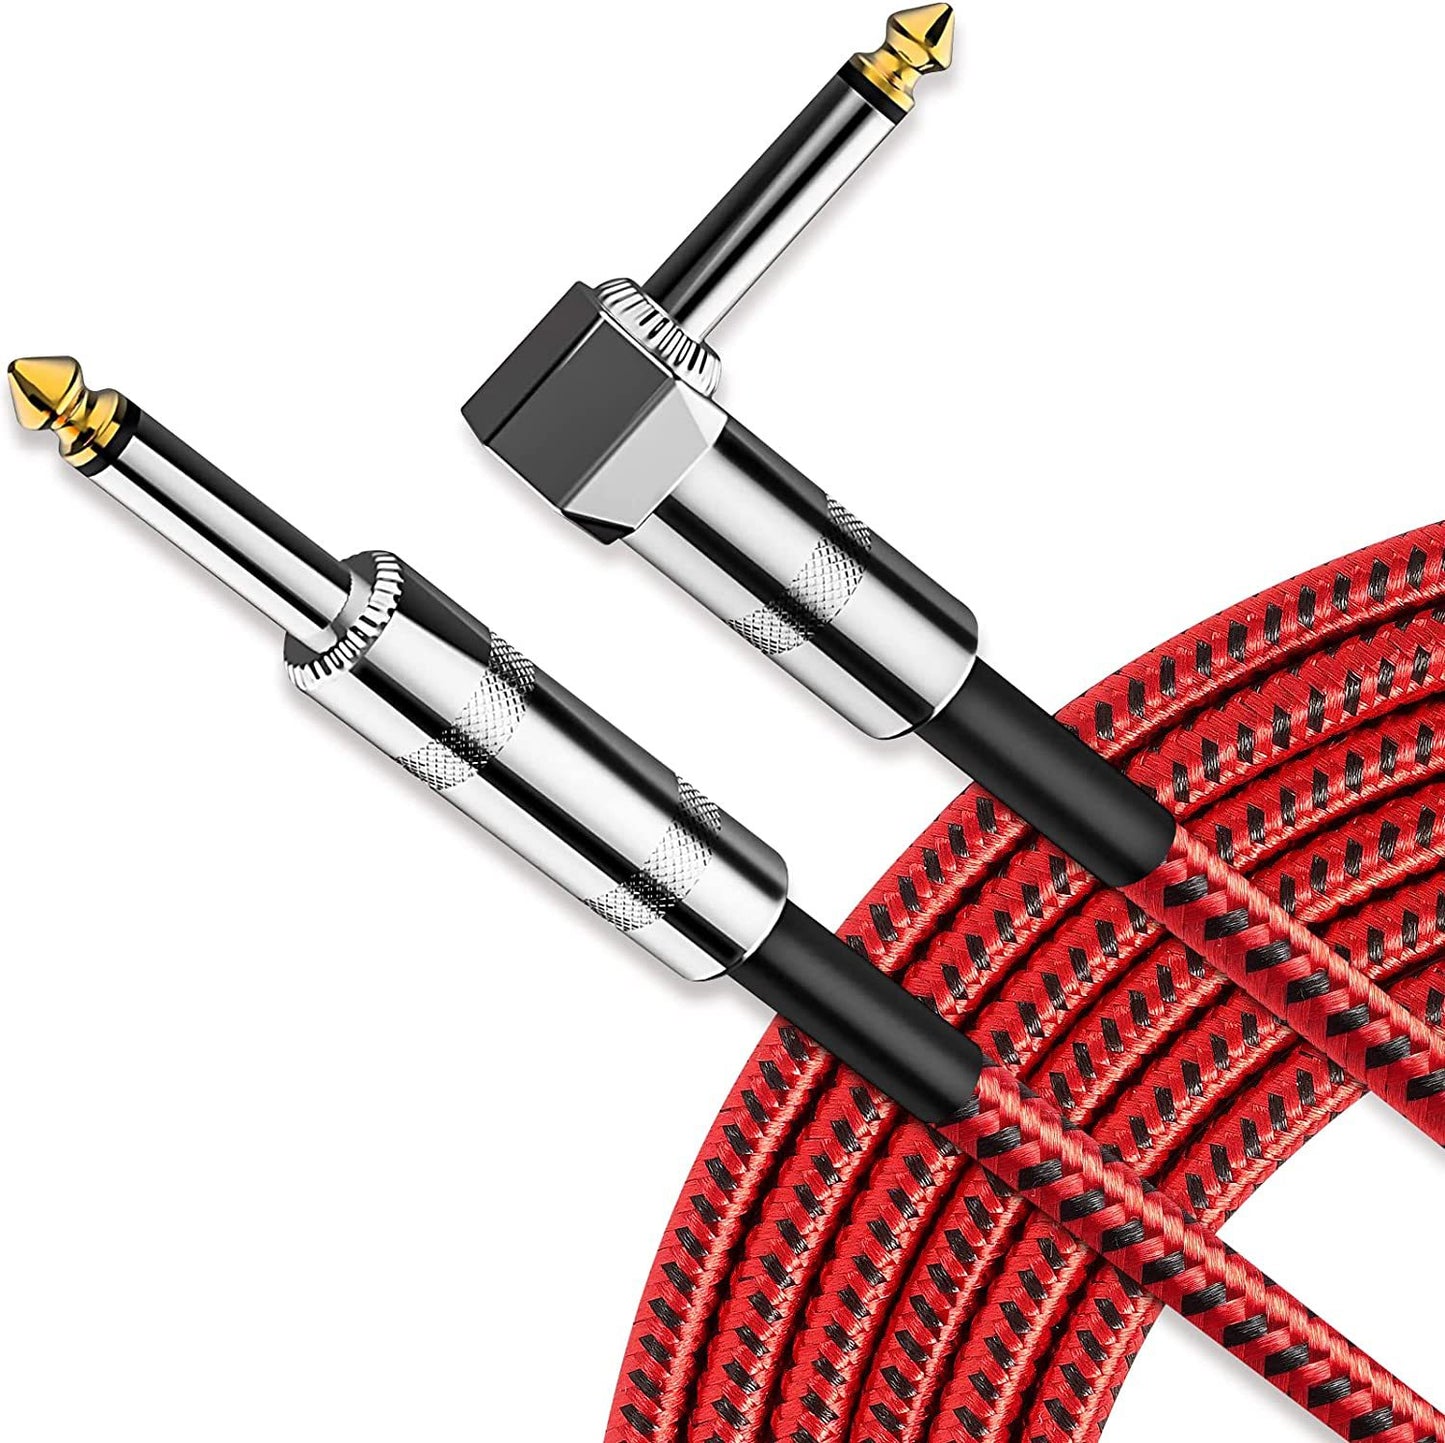 65mm TS Plug Audio Cable 635 Dual Channel Audio Amplifier Cable Monitor Balance Alignment